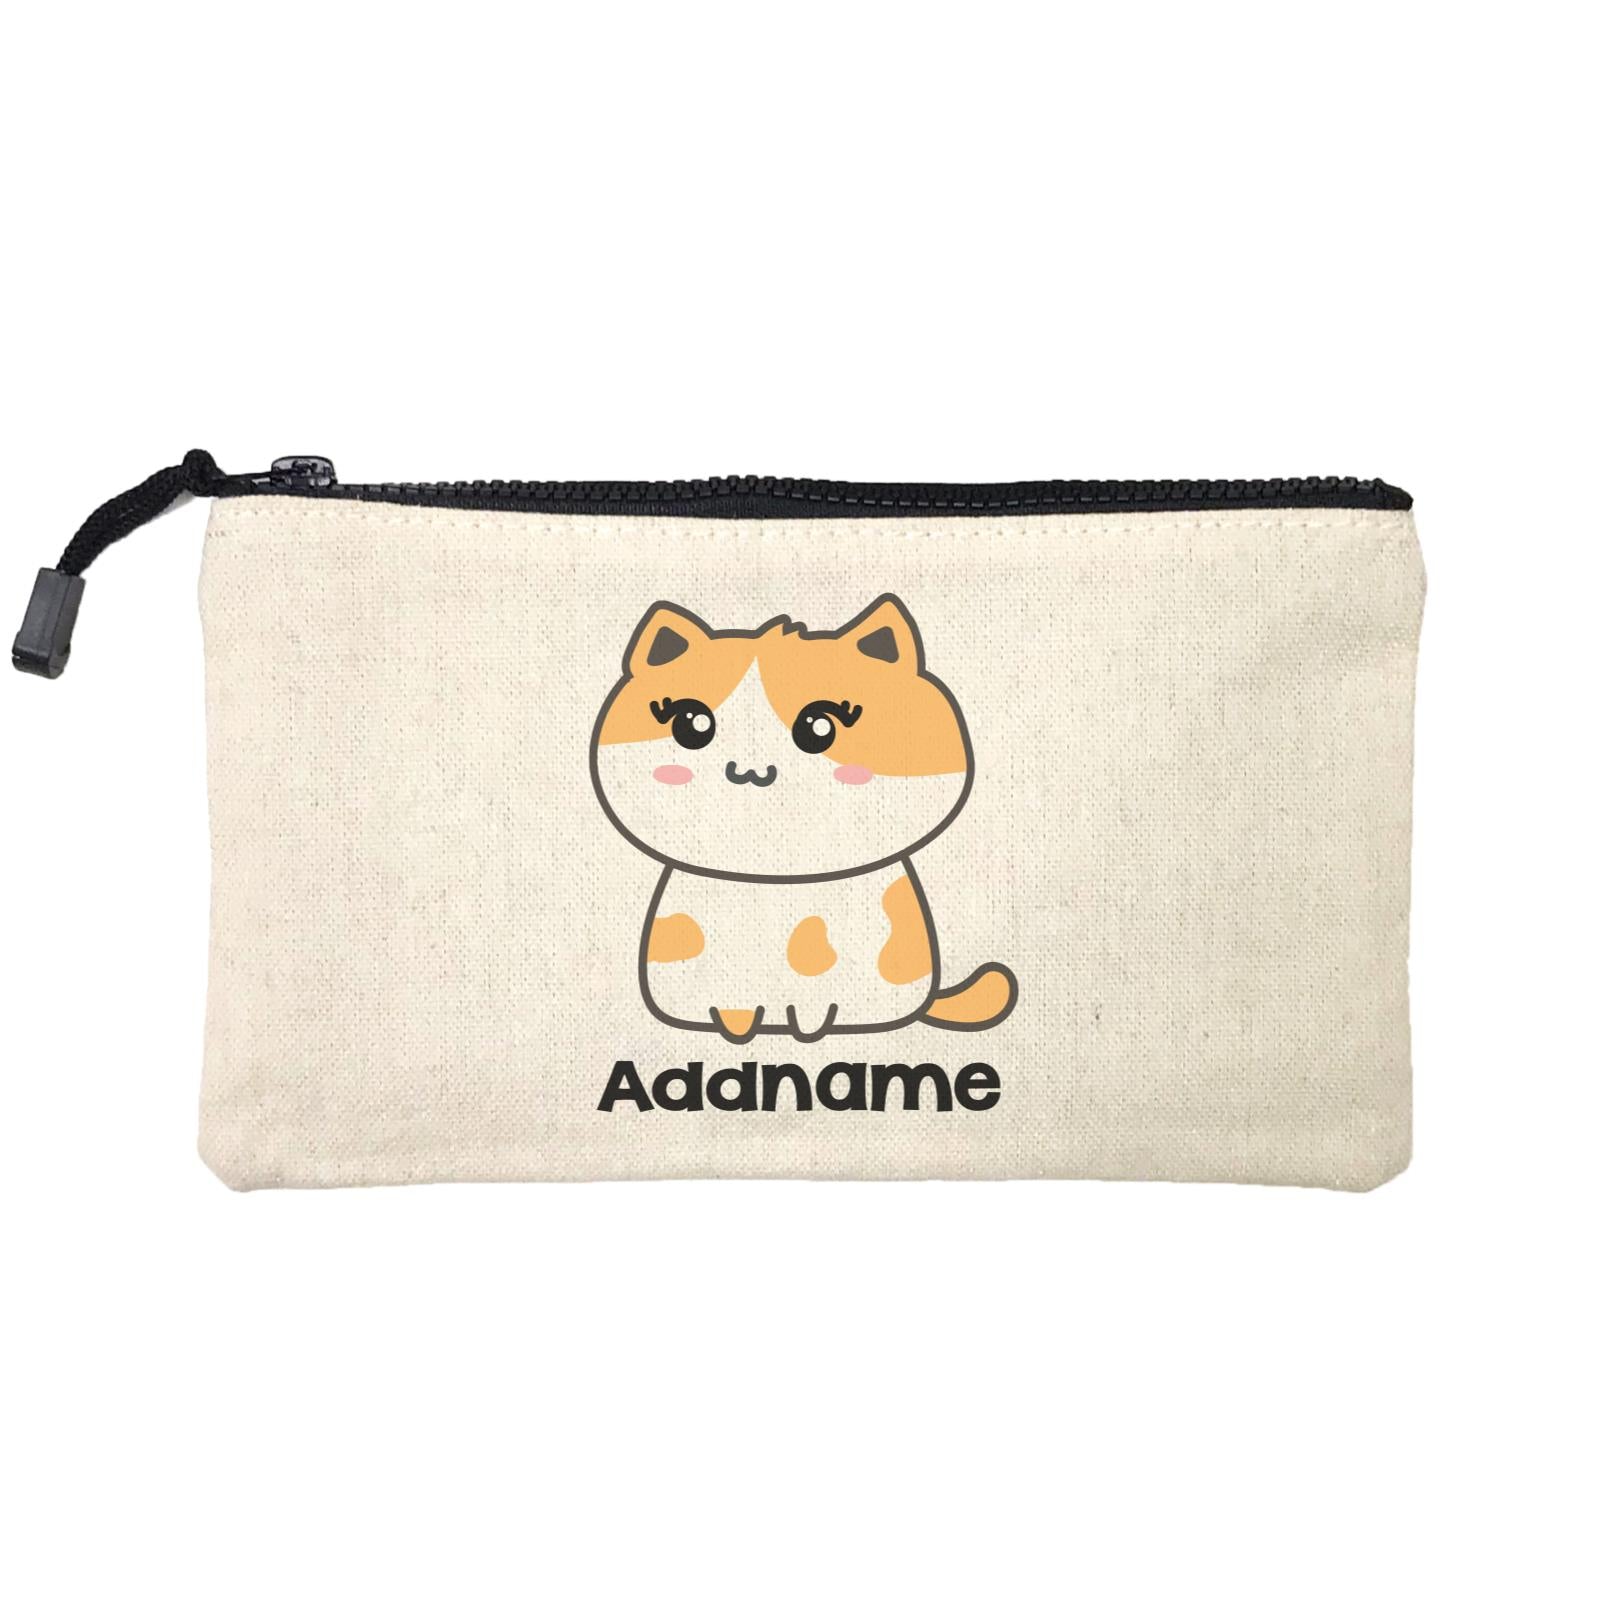 Drawn Adorable Cats White & Yellow Addname Mini Accessories Stationery Pouch